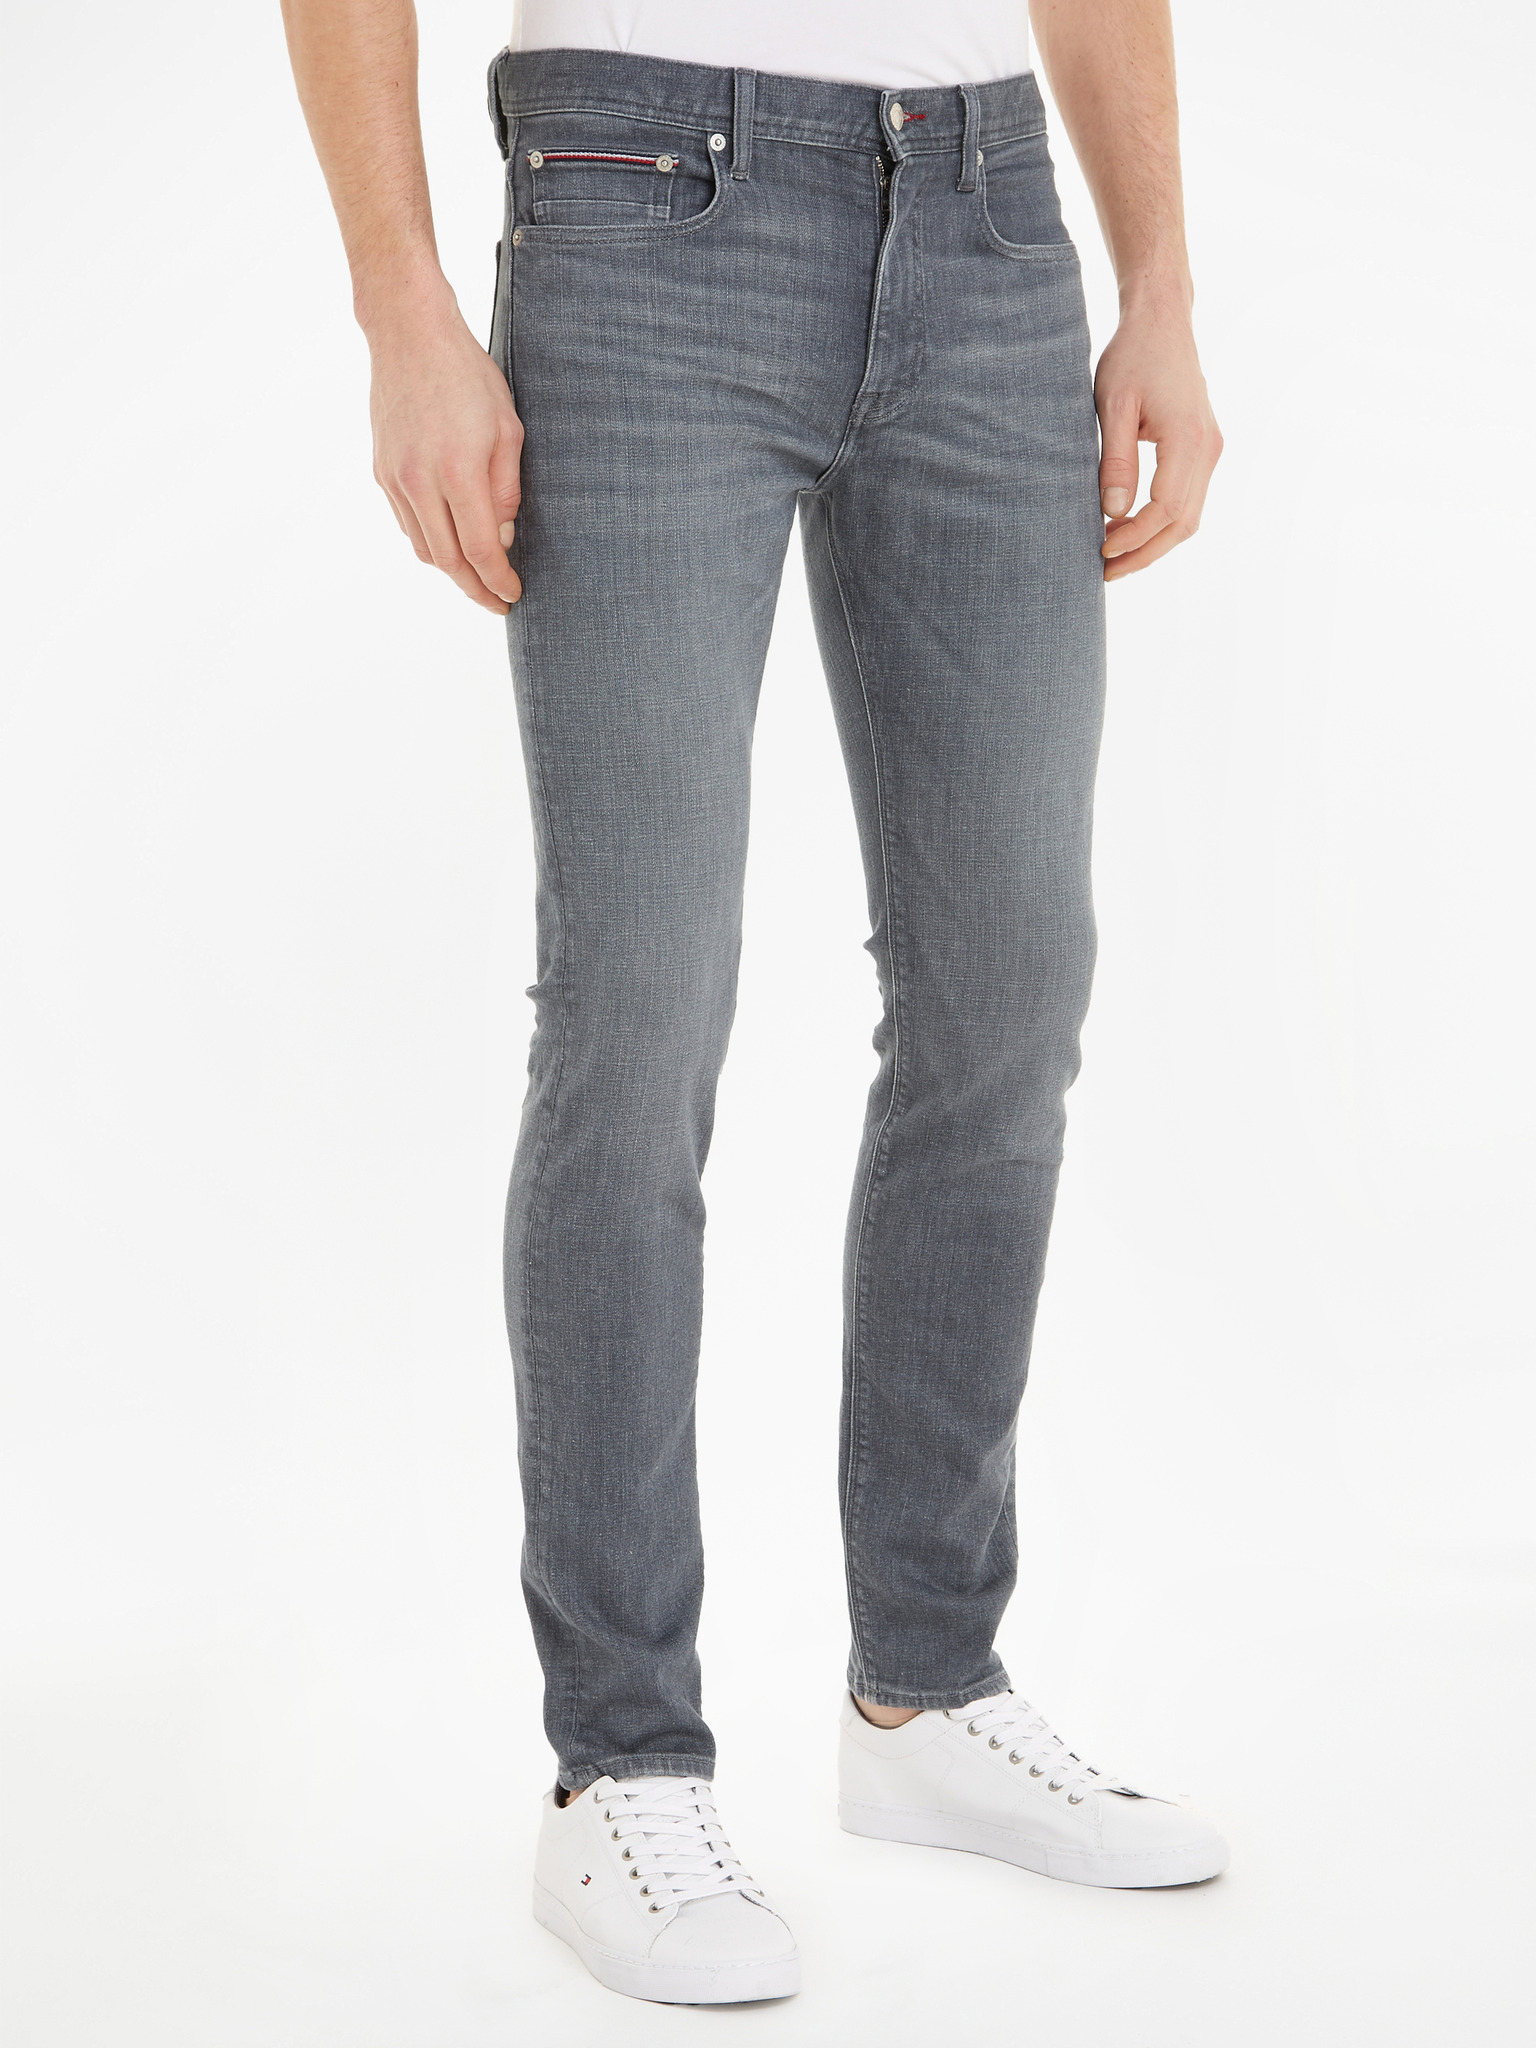 Chester Jeans Tommy Hilfiger